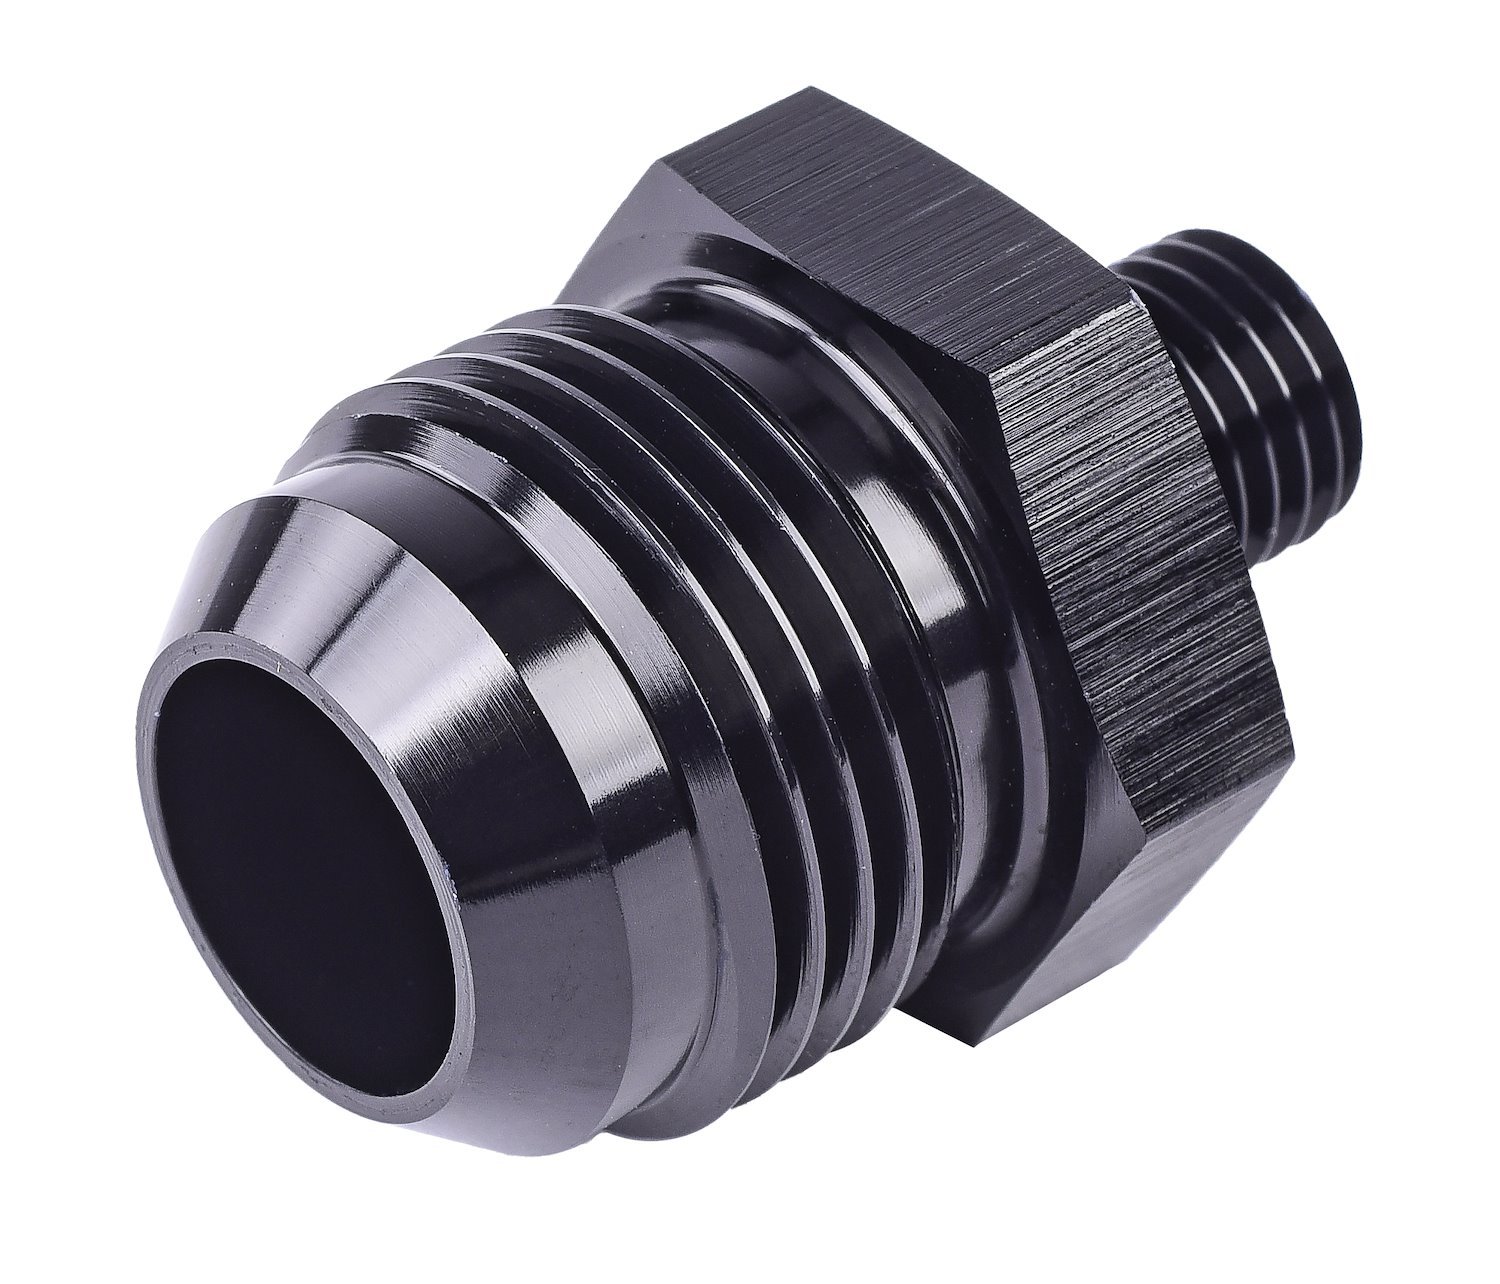 AN to Metric Adapter Fitting [-12 AN Male to 14mm x 1.5 Male]